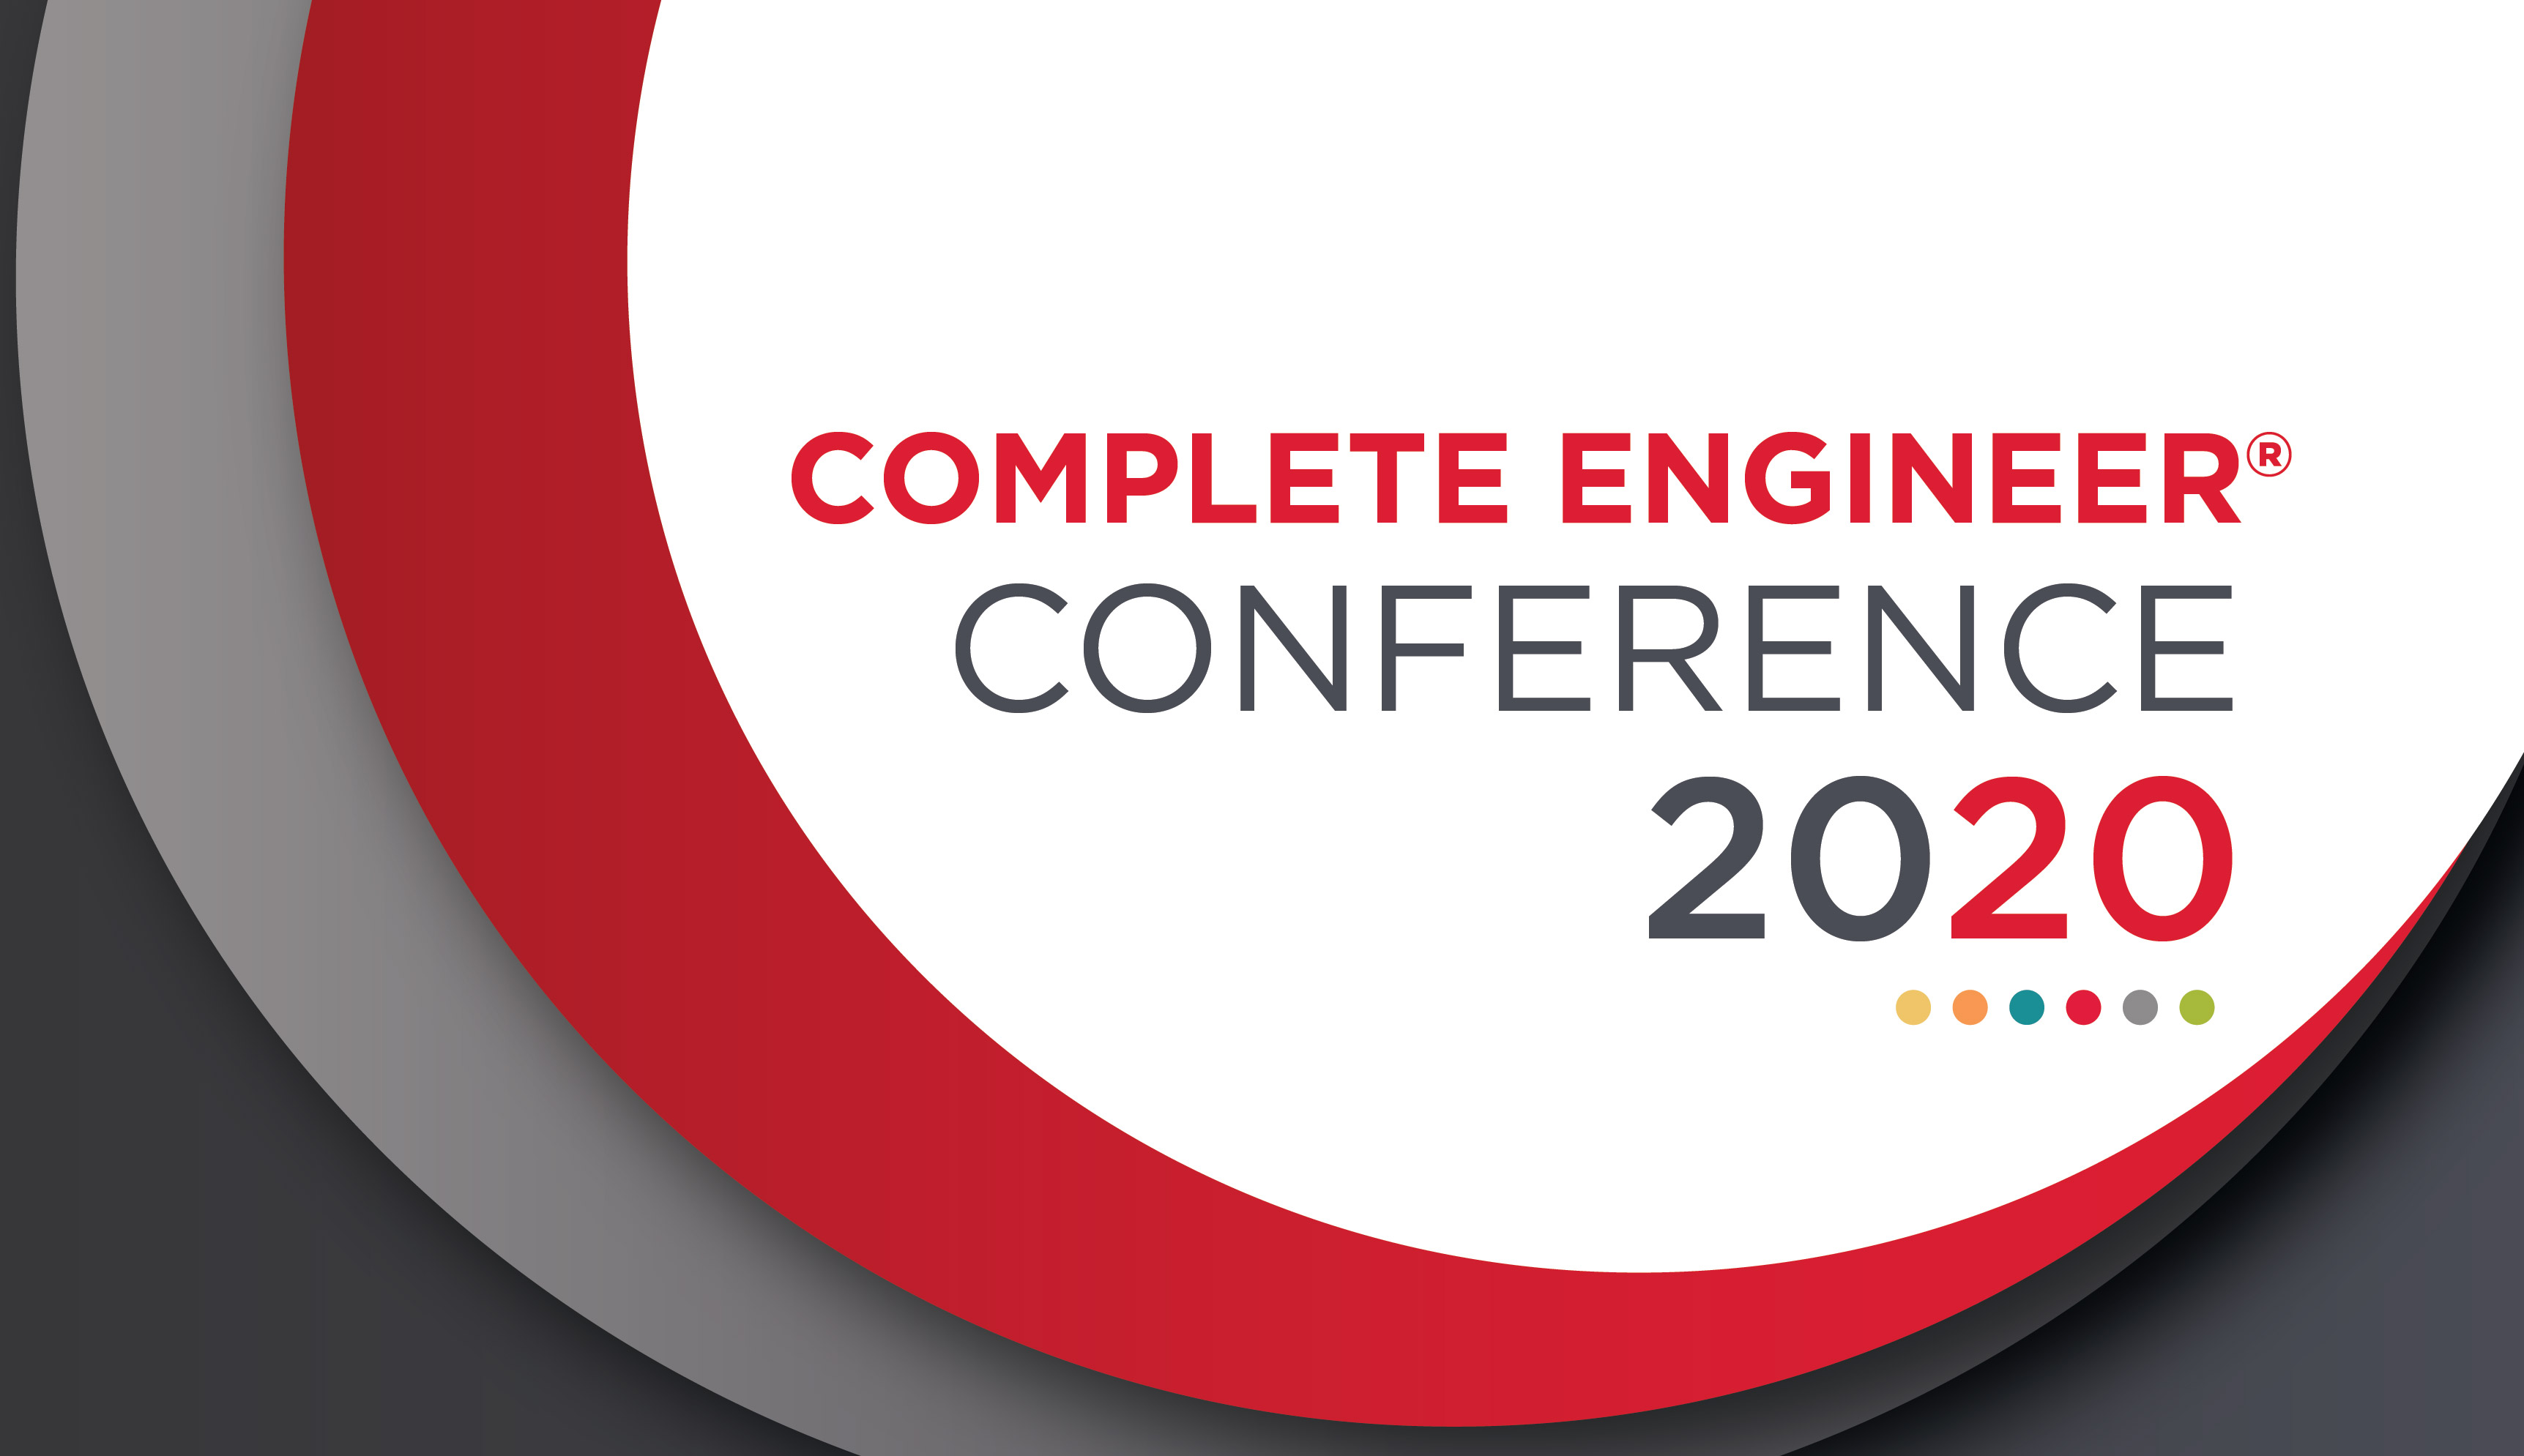 The Complete Engineer® Conference 2020 is March 7 at Nebraska Innovation Campus Conference Center.